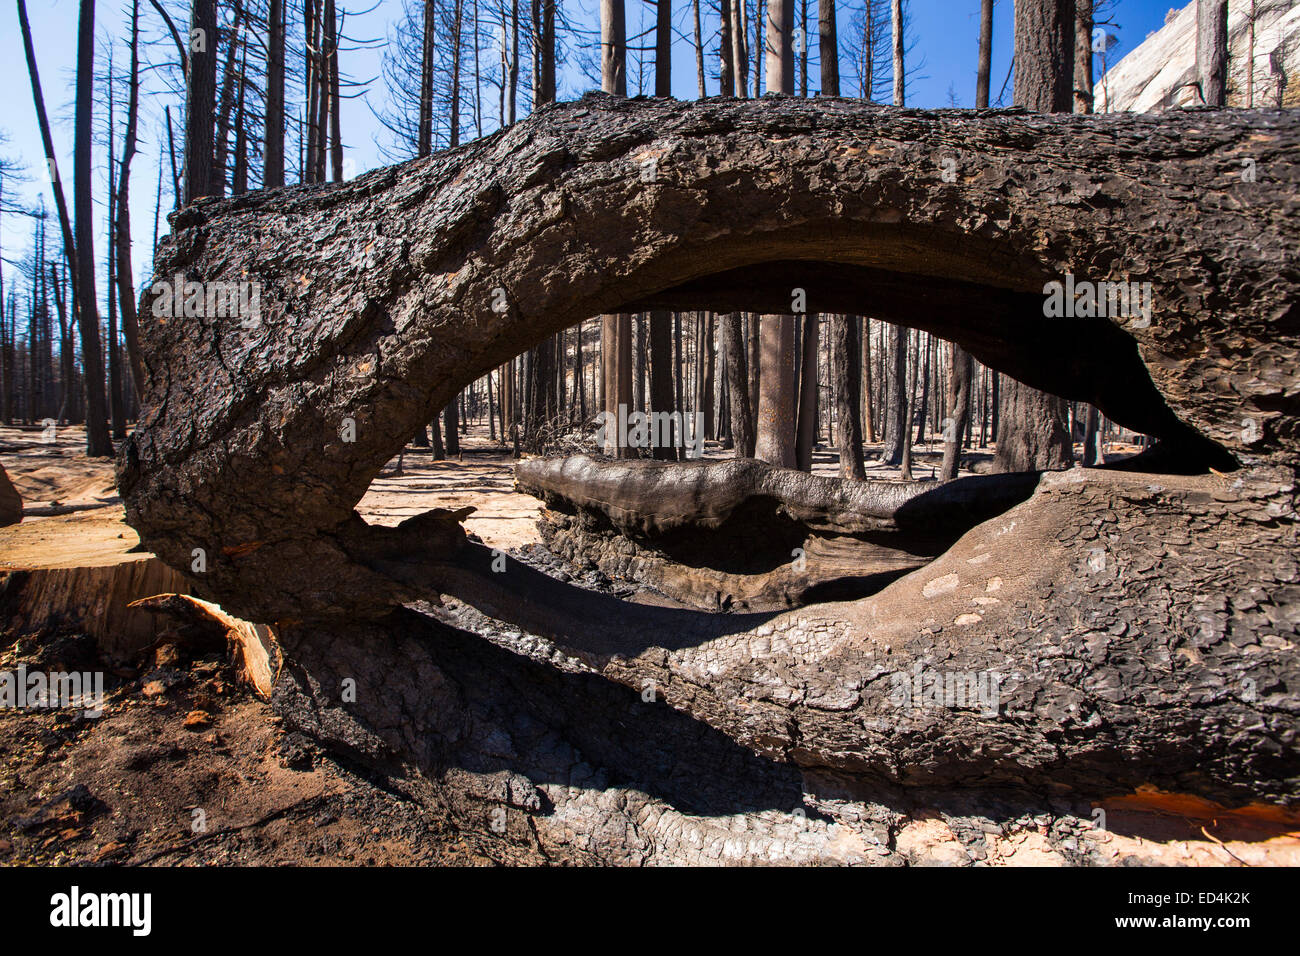 A forest fire destroys an area of forest in the Little Yosemite Valley in the Yosemite National Park, California, USA. Following four years of unprecedented drought, wildfires are becoming increasingly common. This fire was started by a lightening strike. Stock Photo